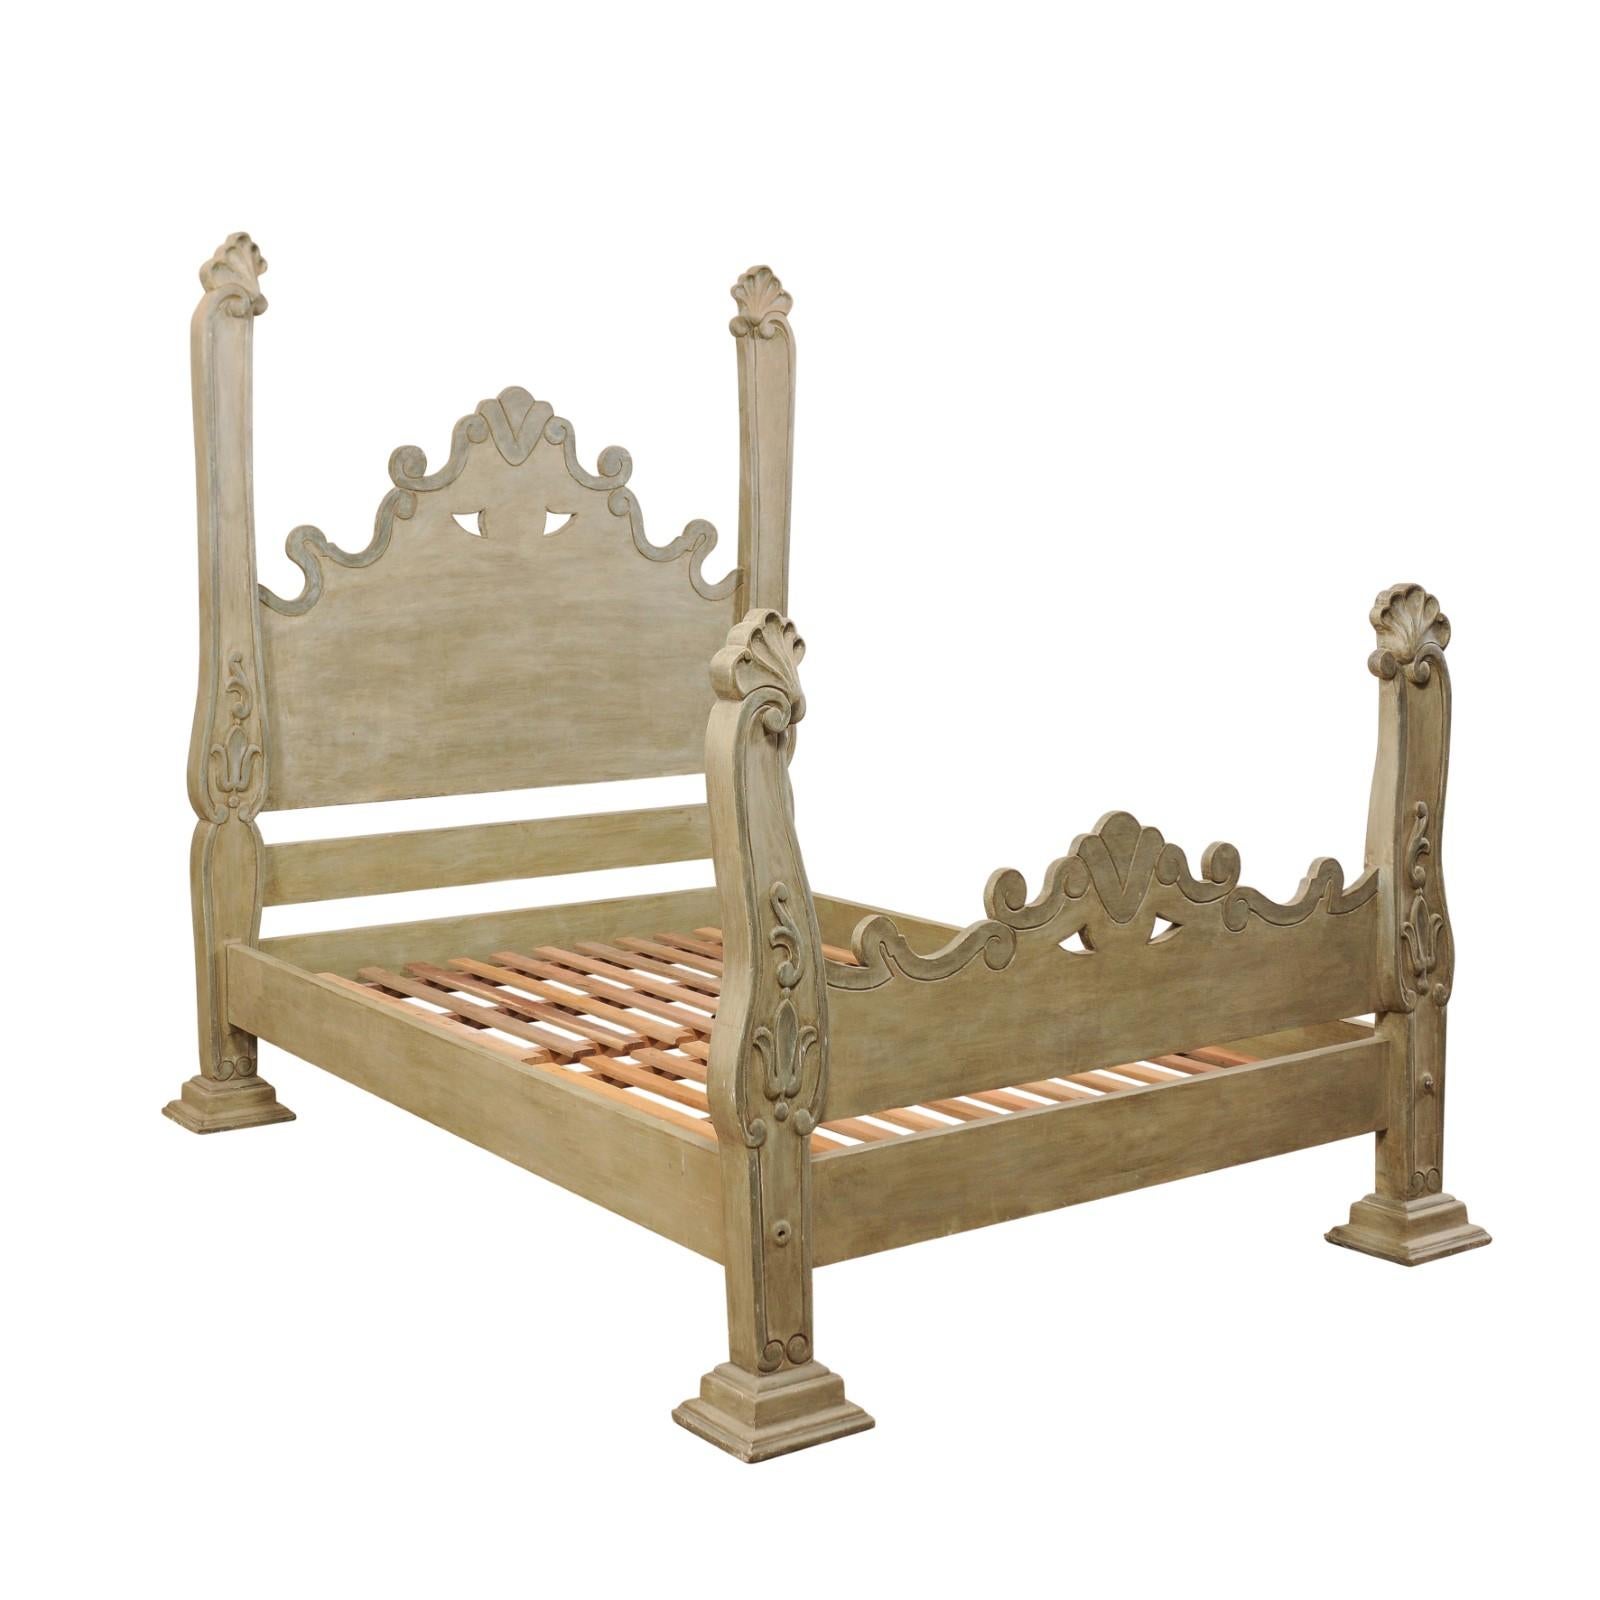 Unique Carved and Painted Wood Queen Bed Frame from Brazil